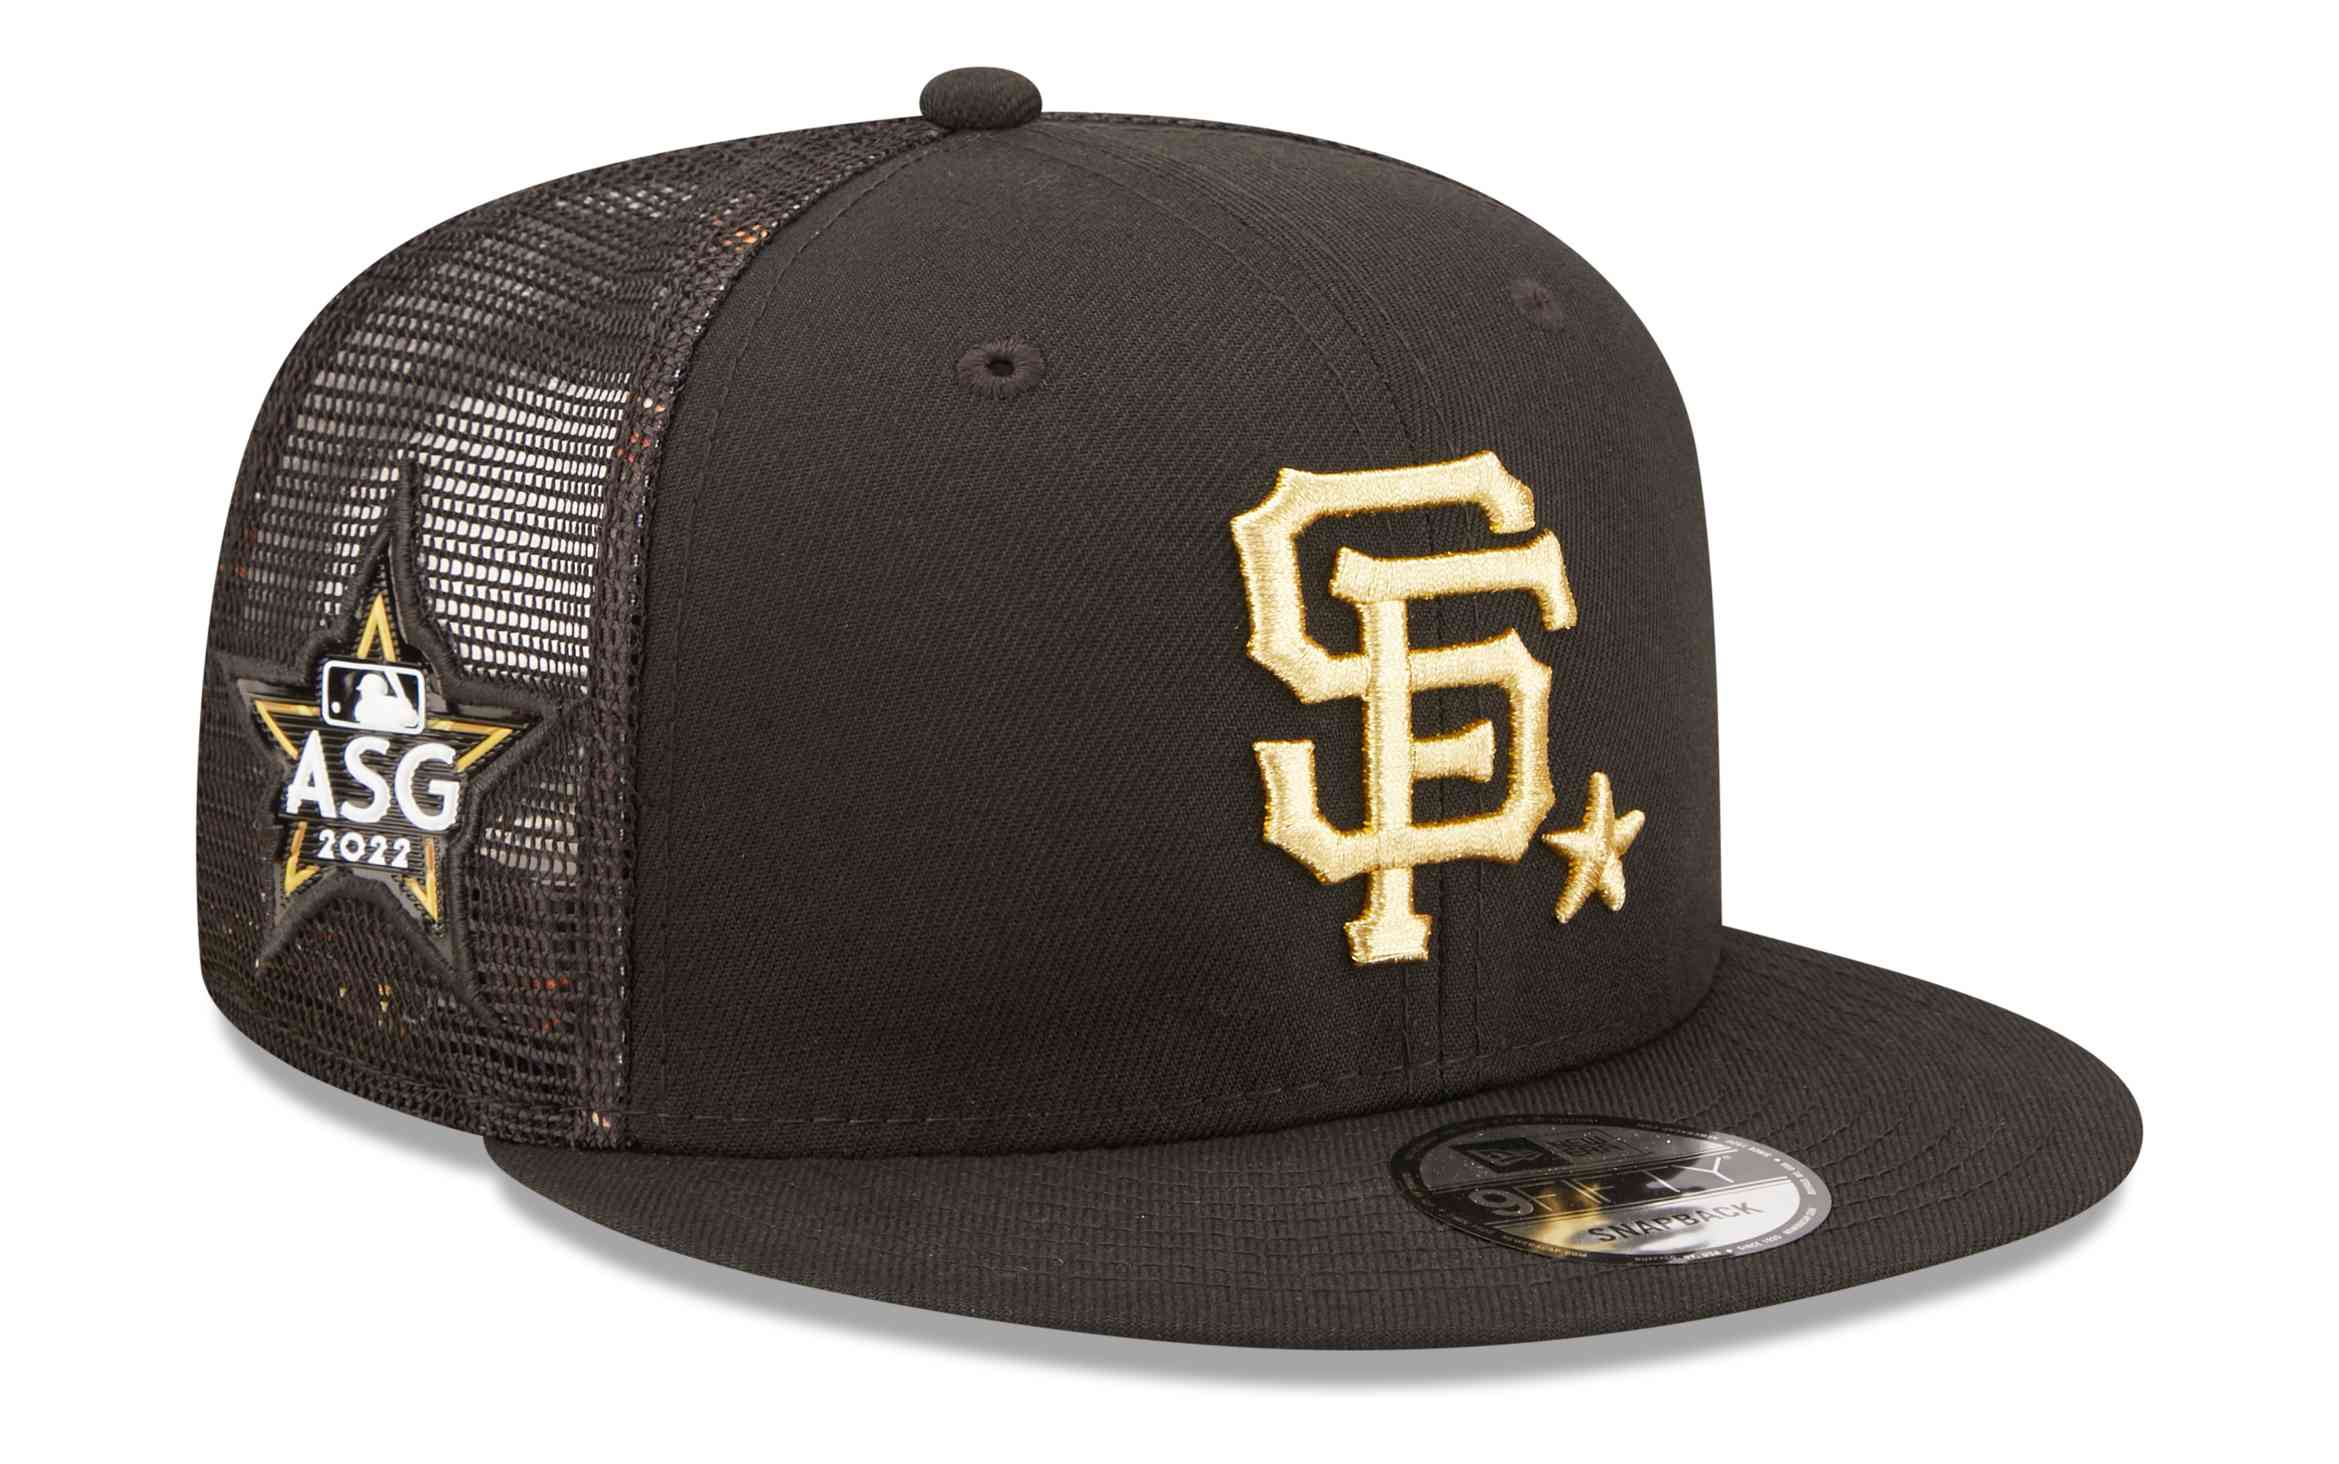 New Era - MLB San Francisco Giants All Star Game Patch 9Fifty